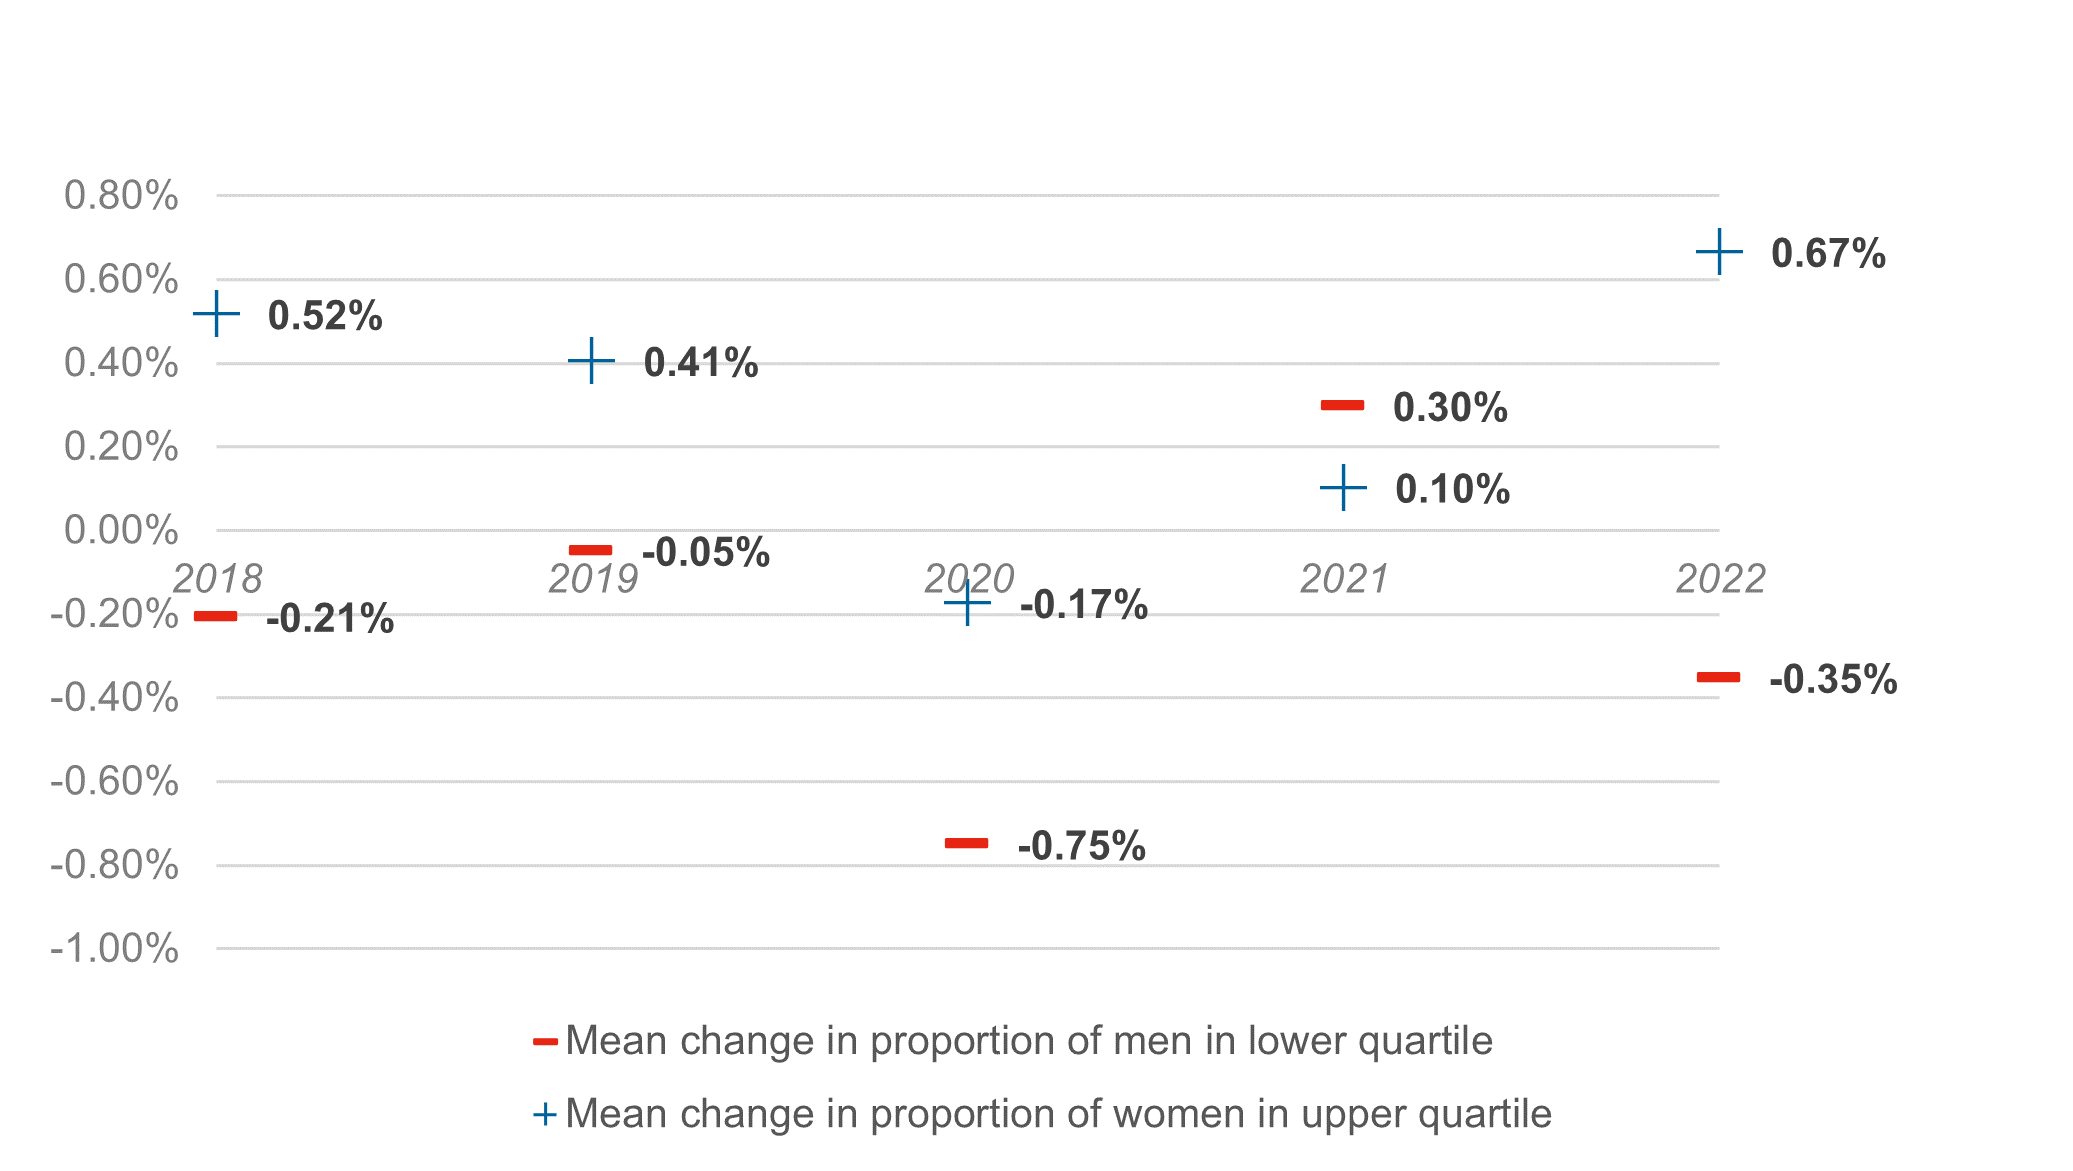 Mean change in proportion of men and women in upper and lower quartiles